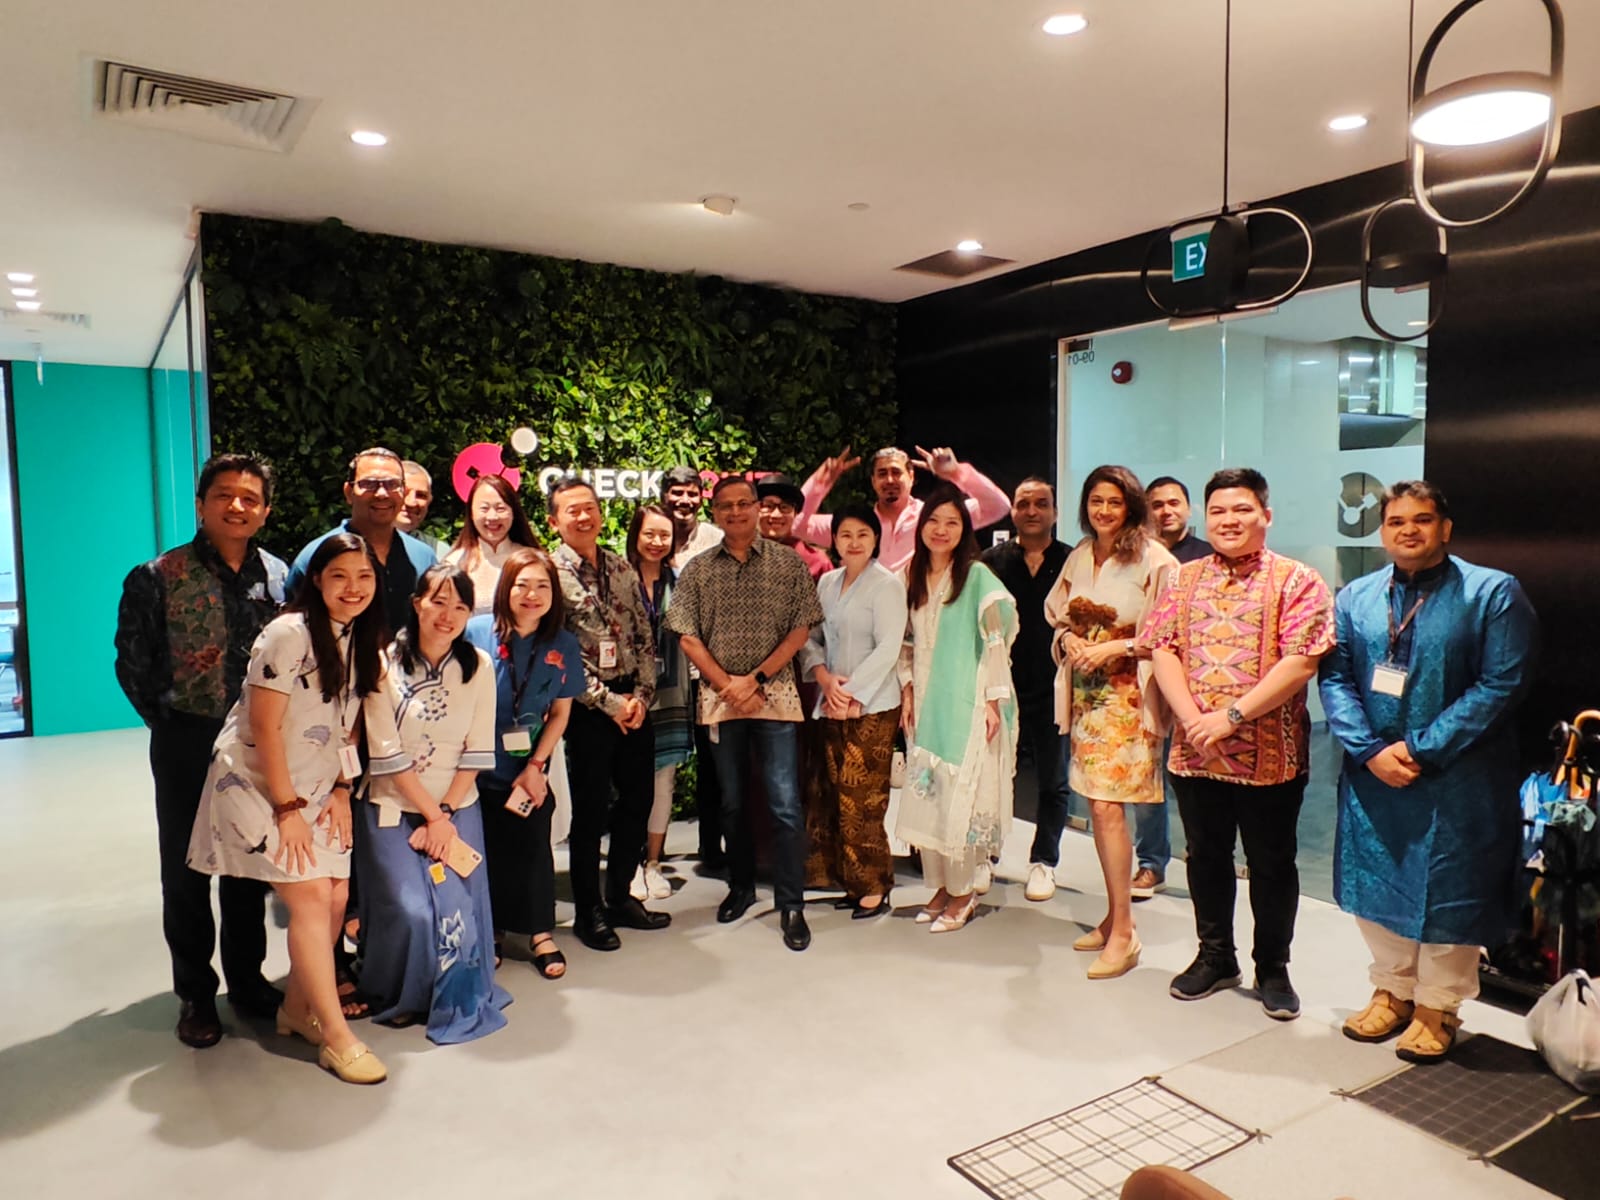 Check Point Singapore nurtures a culture of collaboration and support